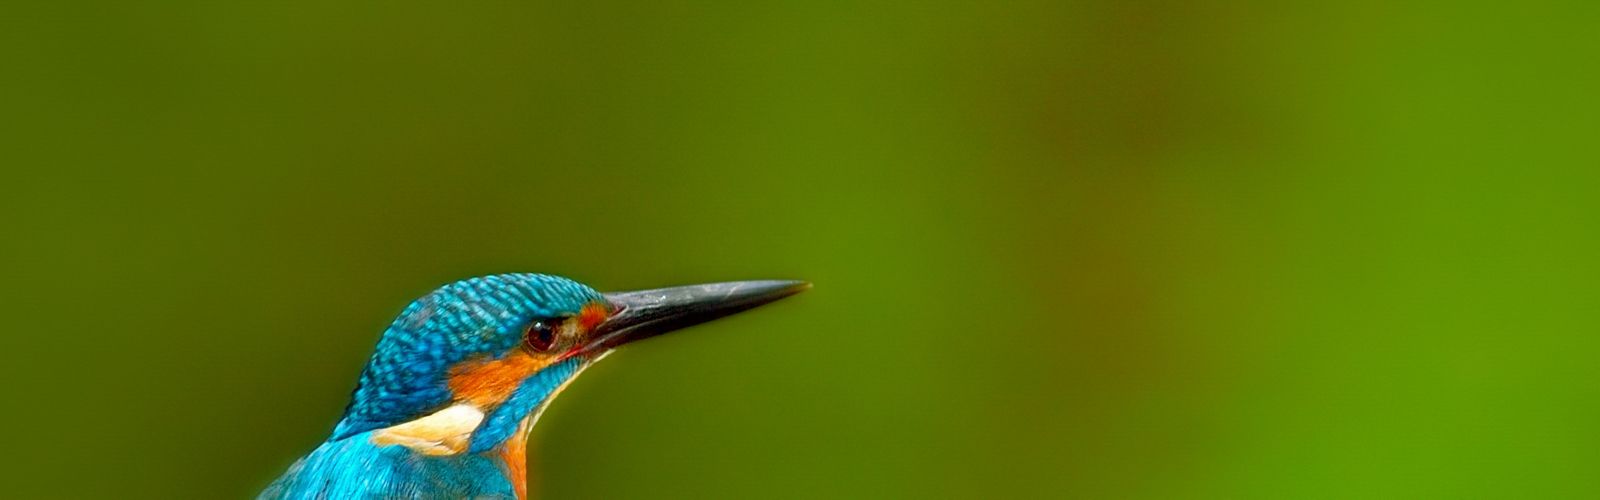 A kingfisher bird looks to the right.